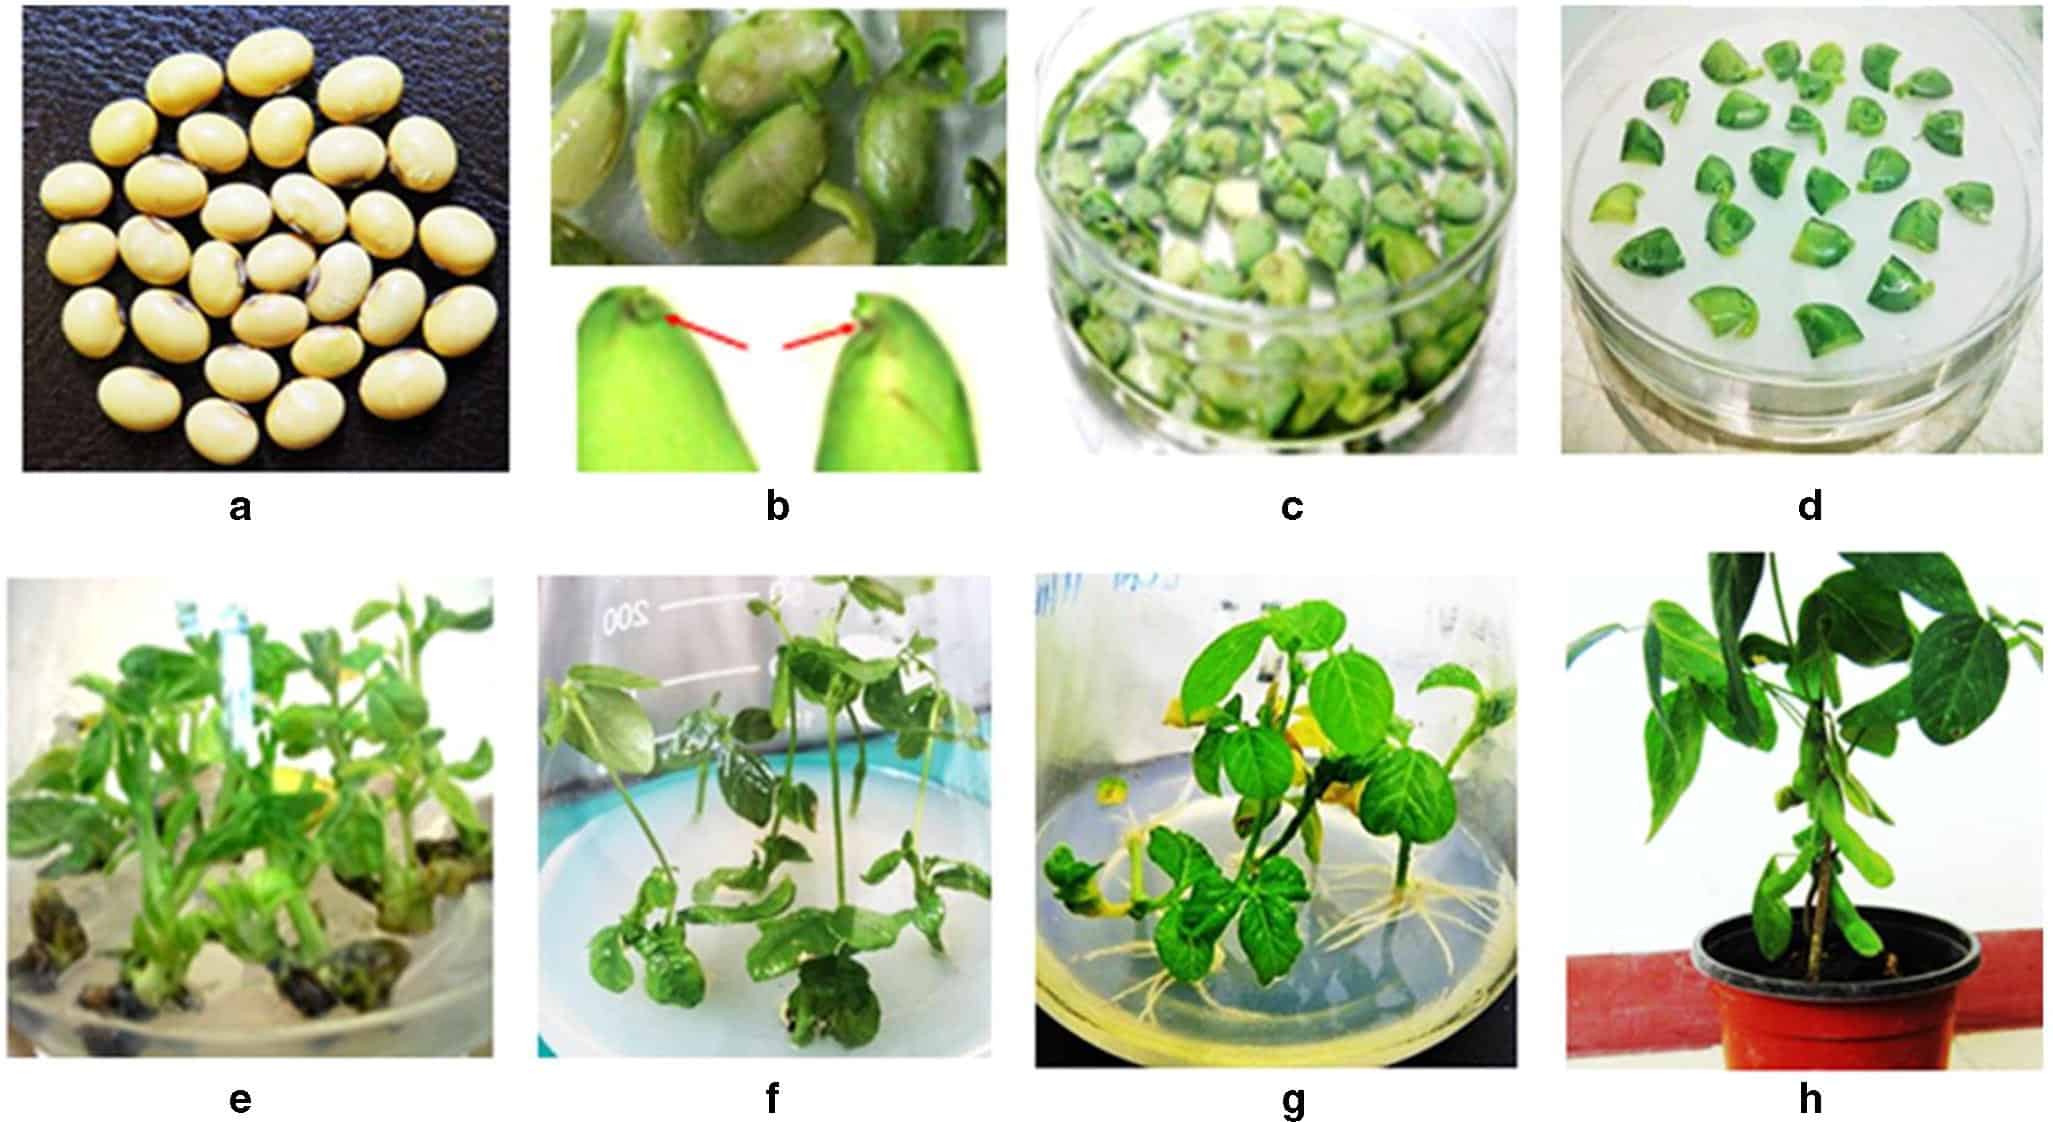 Steps for producing Transgenic Plants